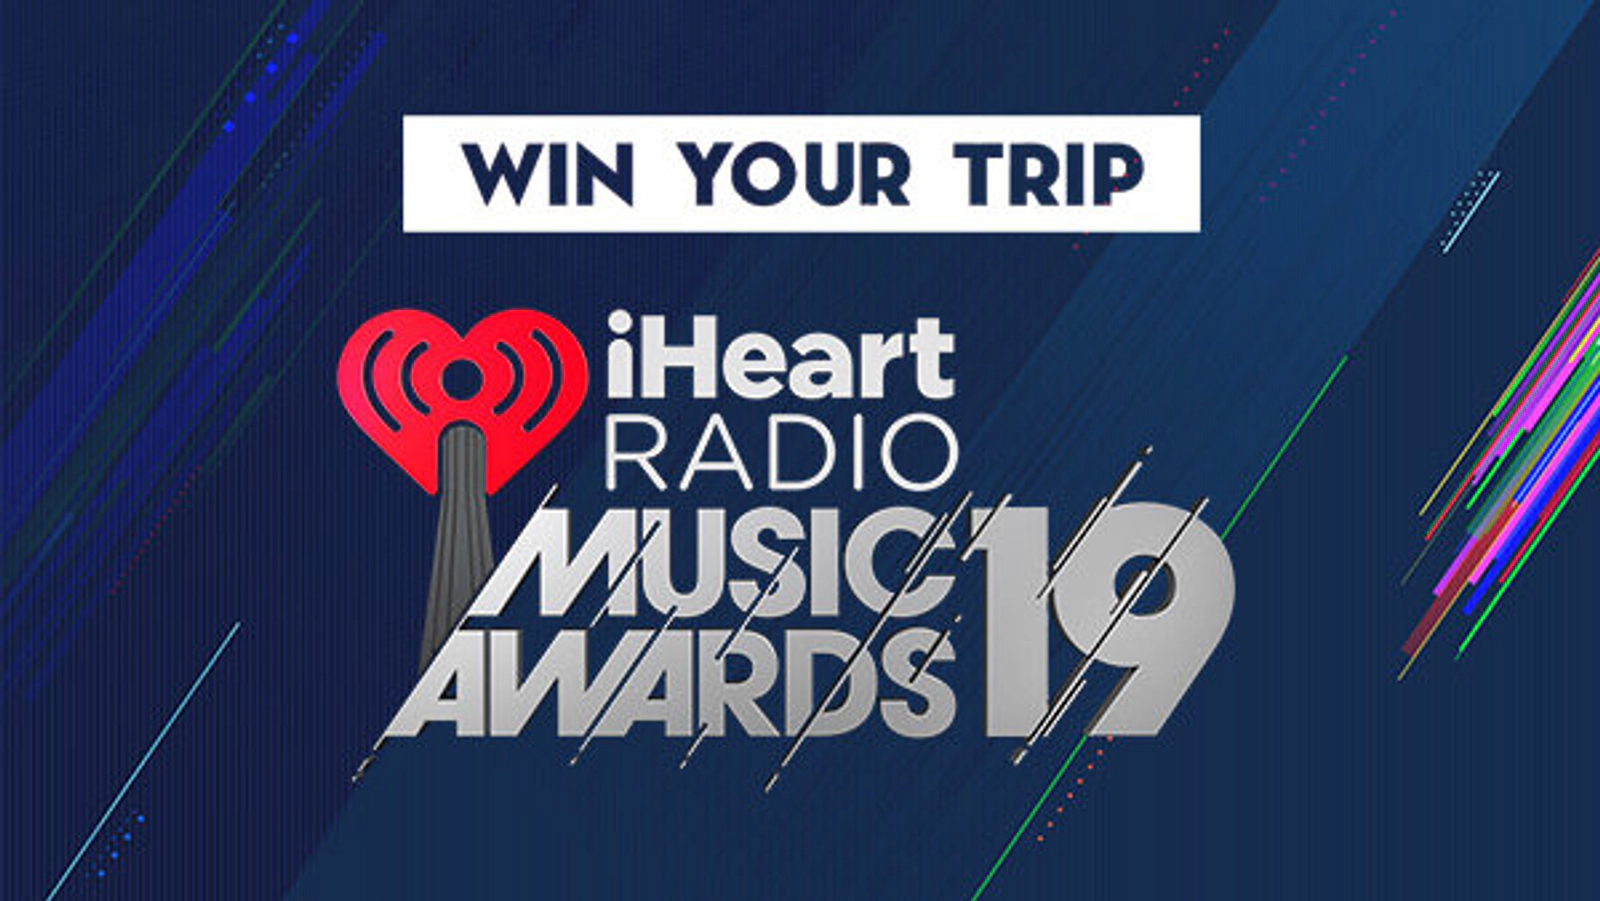   Vote Daily For A Chance To Win A Trip To Our iHeartRadio Music Awards!   - Thumbnail Image